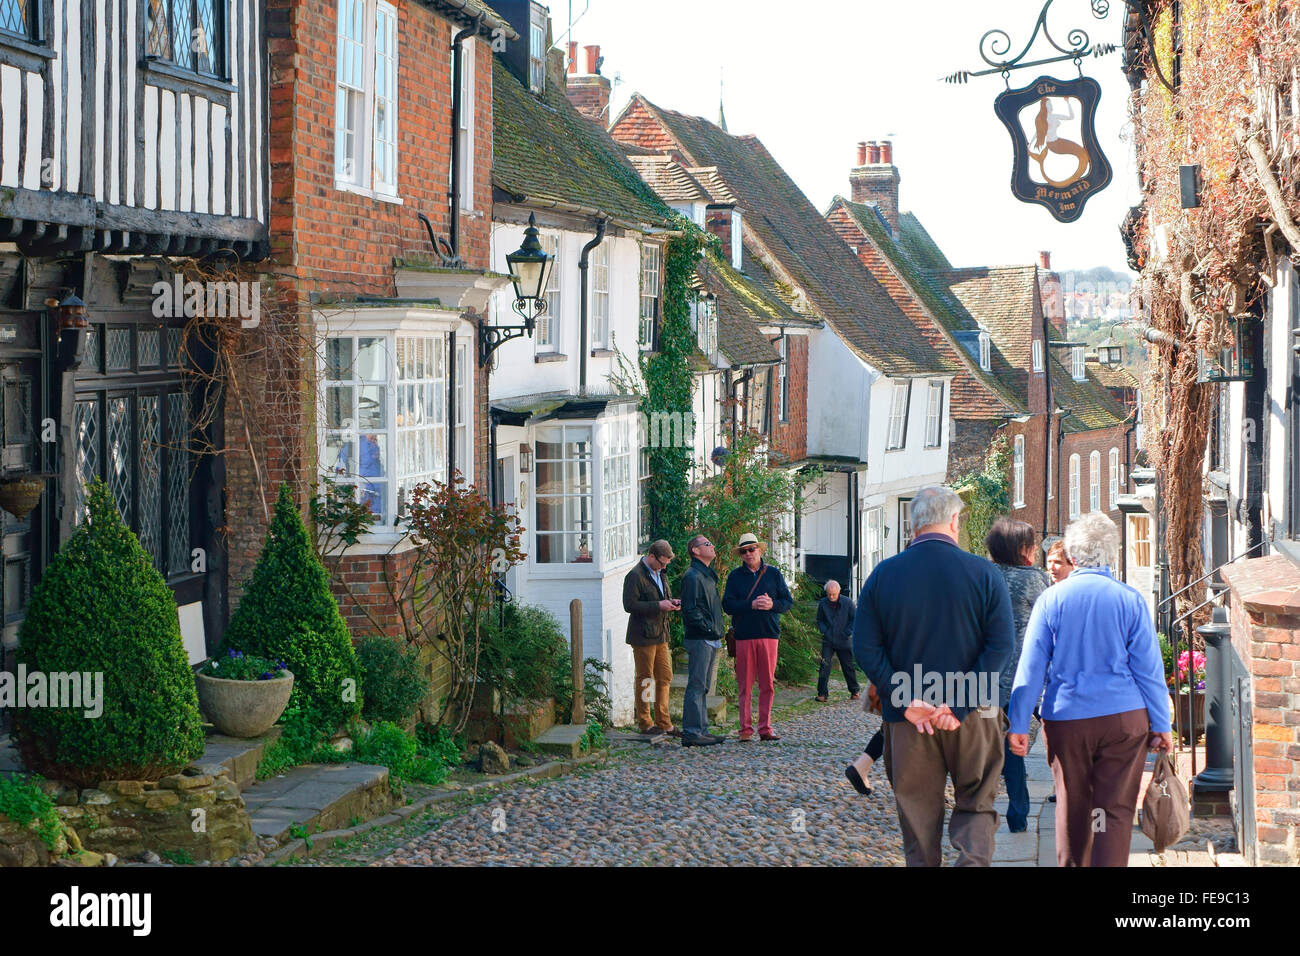 Visitors in the quaint and popular cobblestone Mermaid Street, in the historic ancient Cinque Port town of Rye, East Sussex, United Kingdom, UK, GB Stock Photo